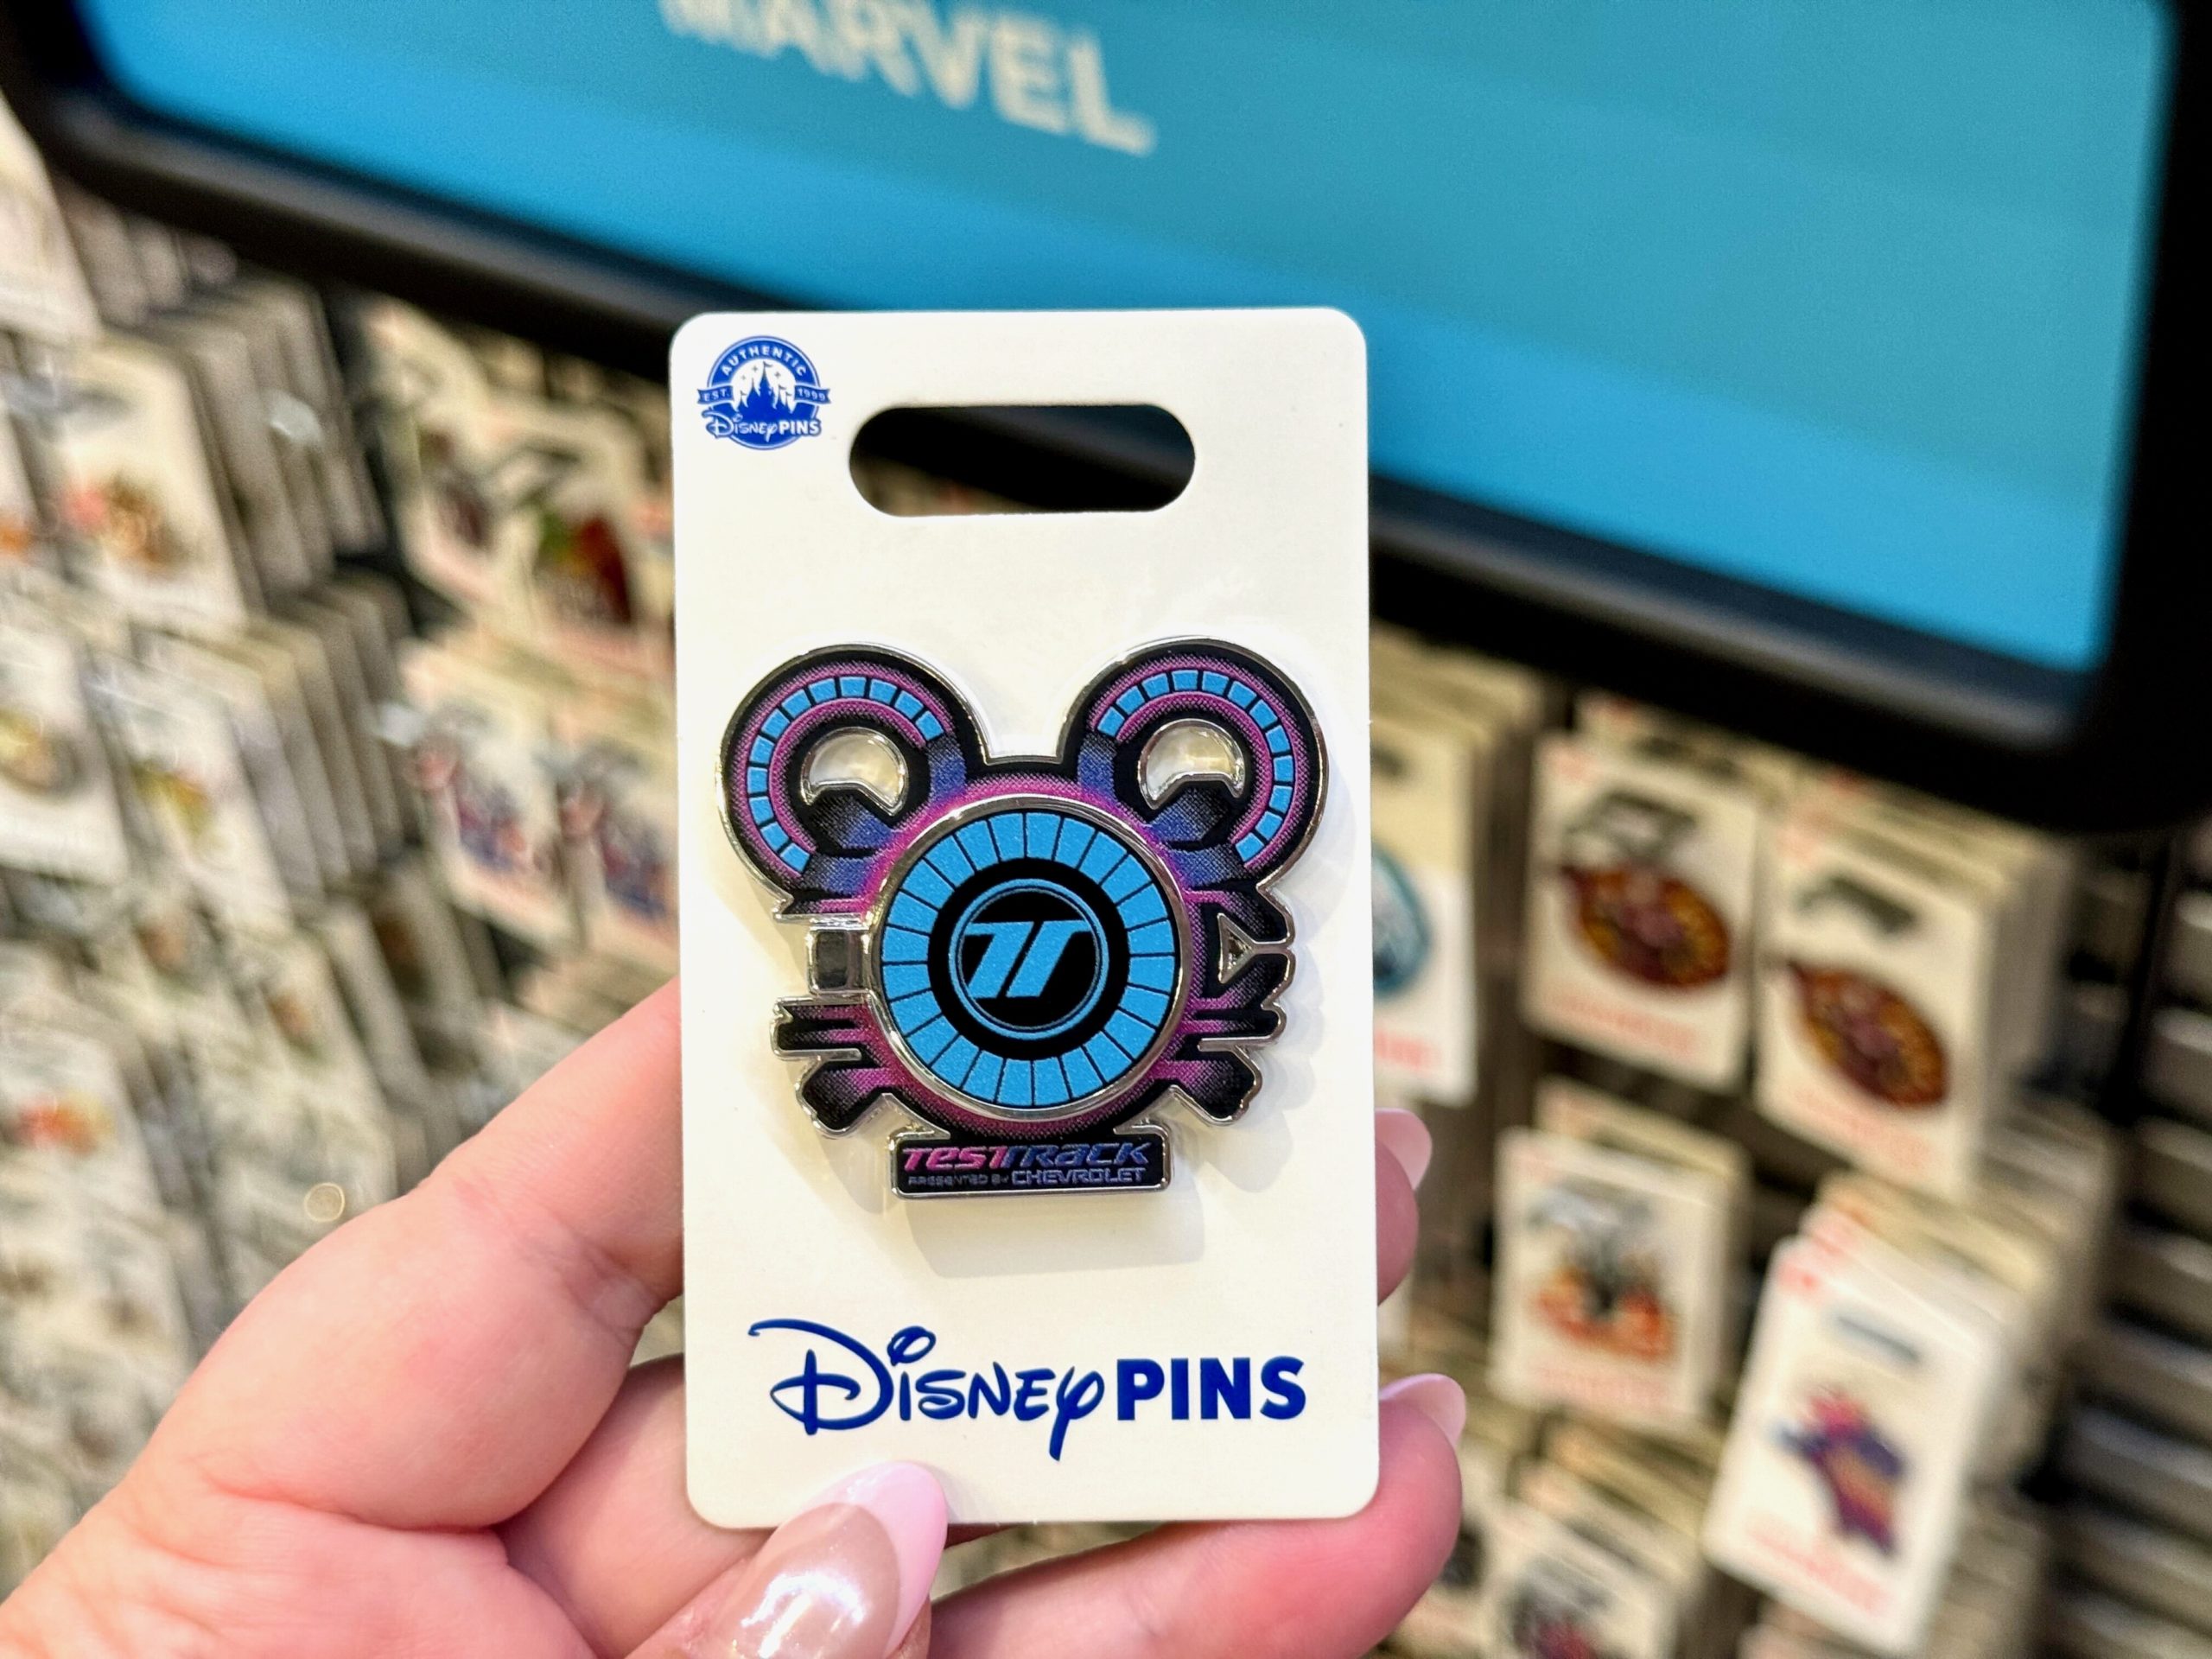 Trading Pins in EPCOT